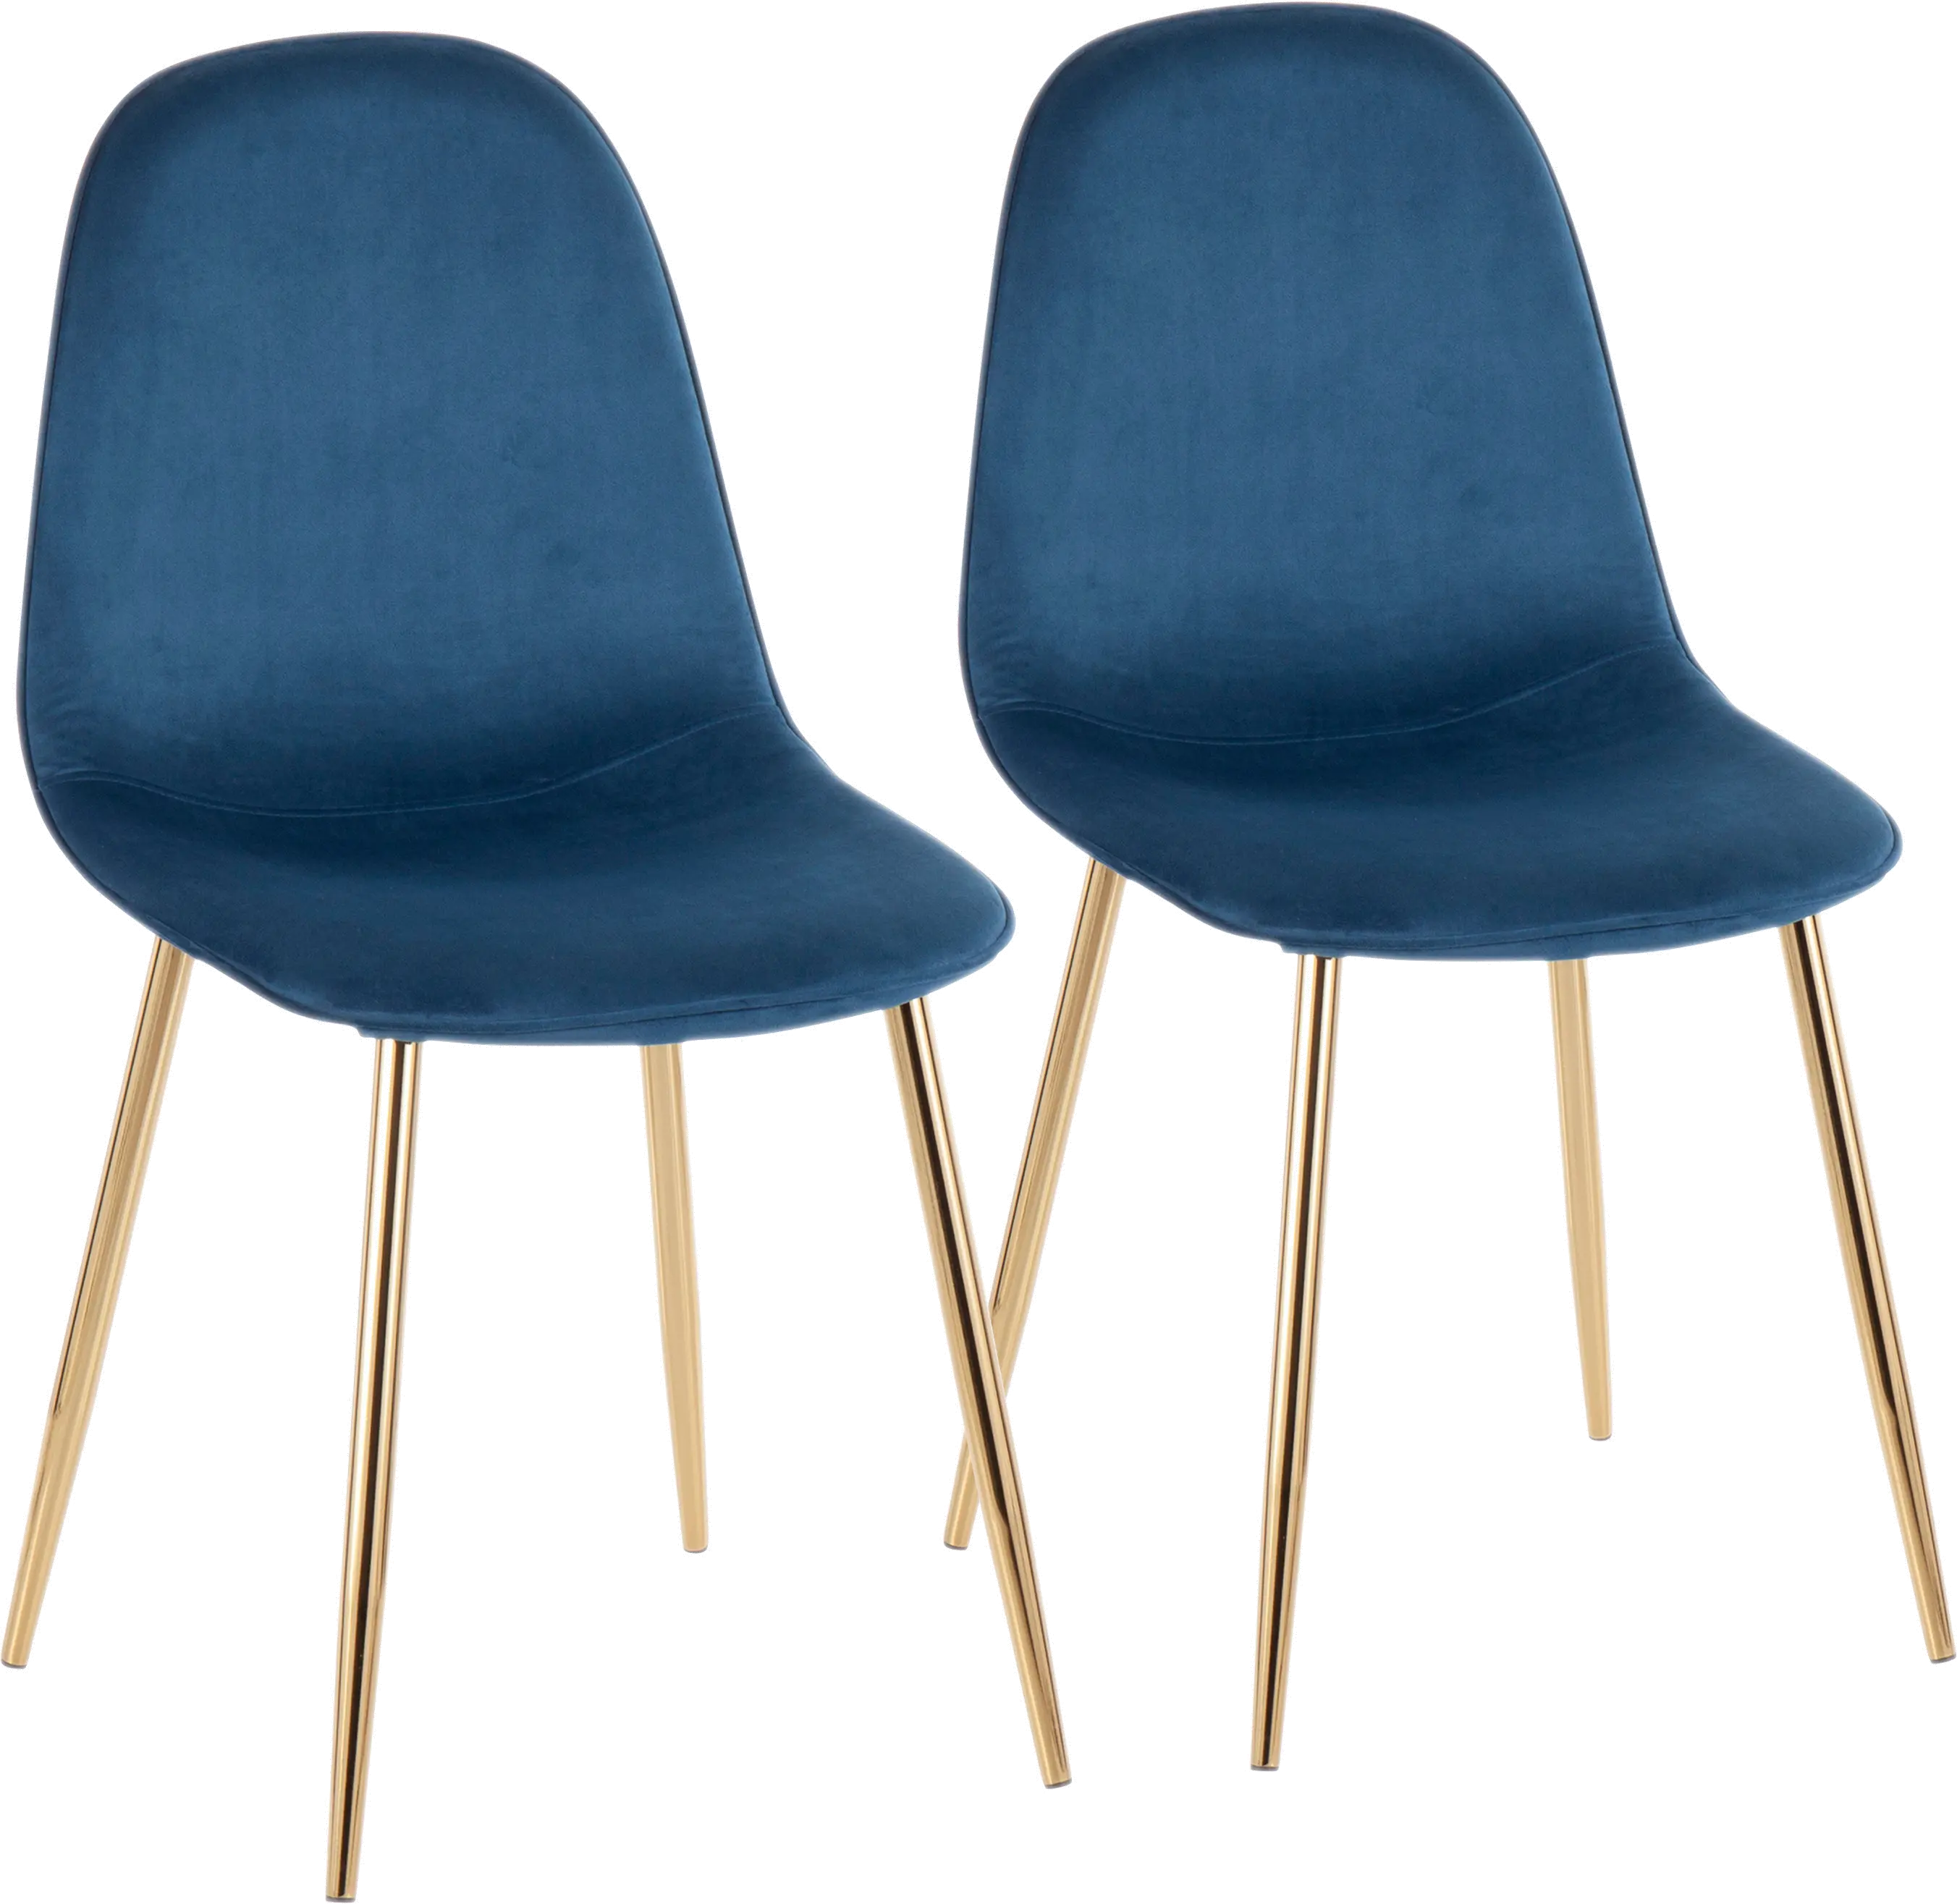 Contemporary Blue and Gold Dining Room Chair (Set of 2) - Pebble